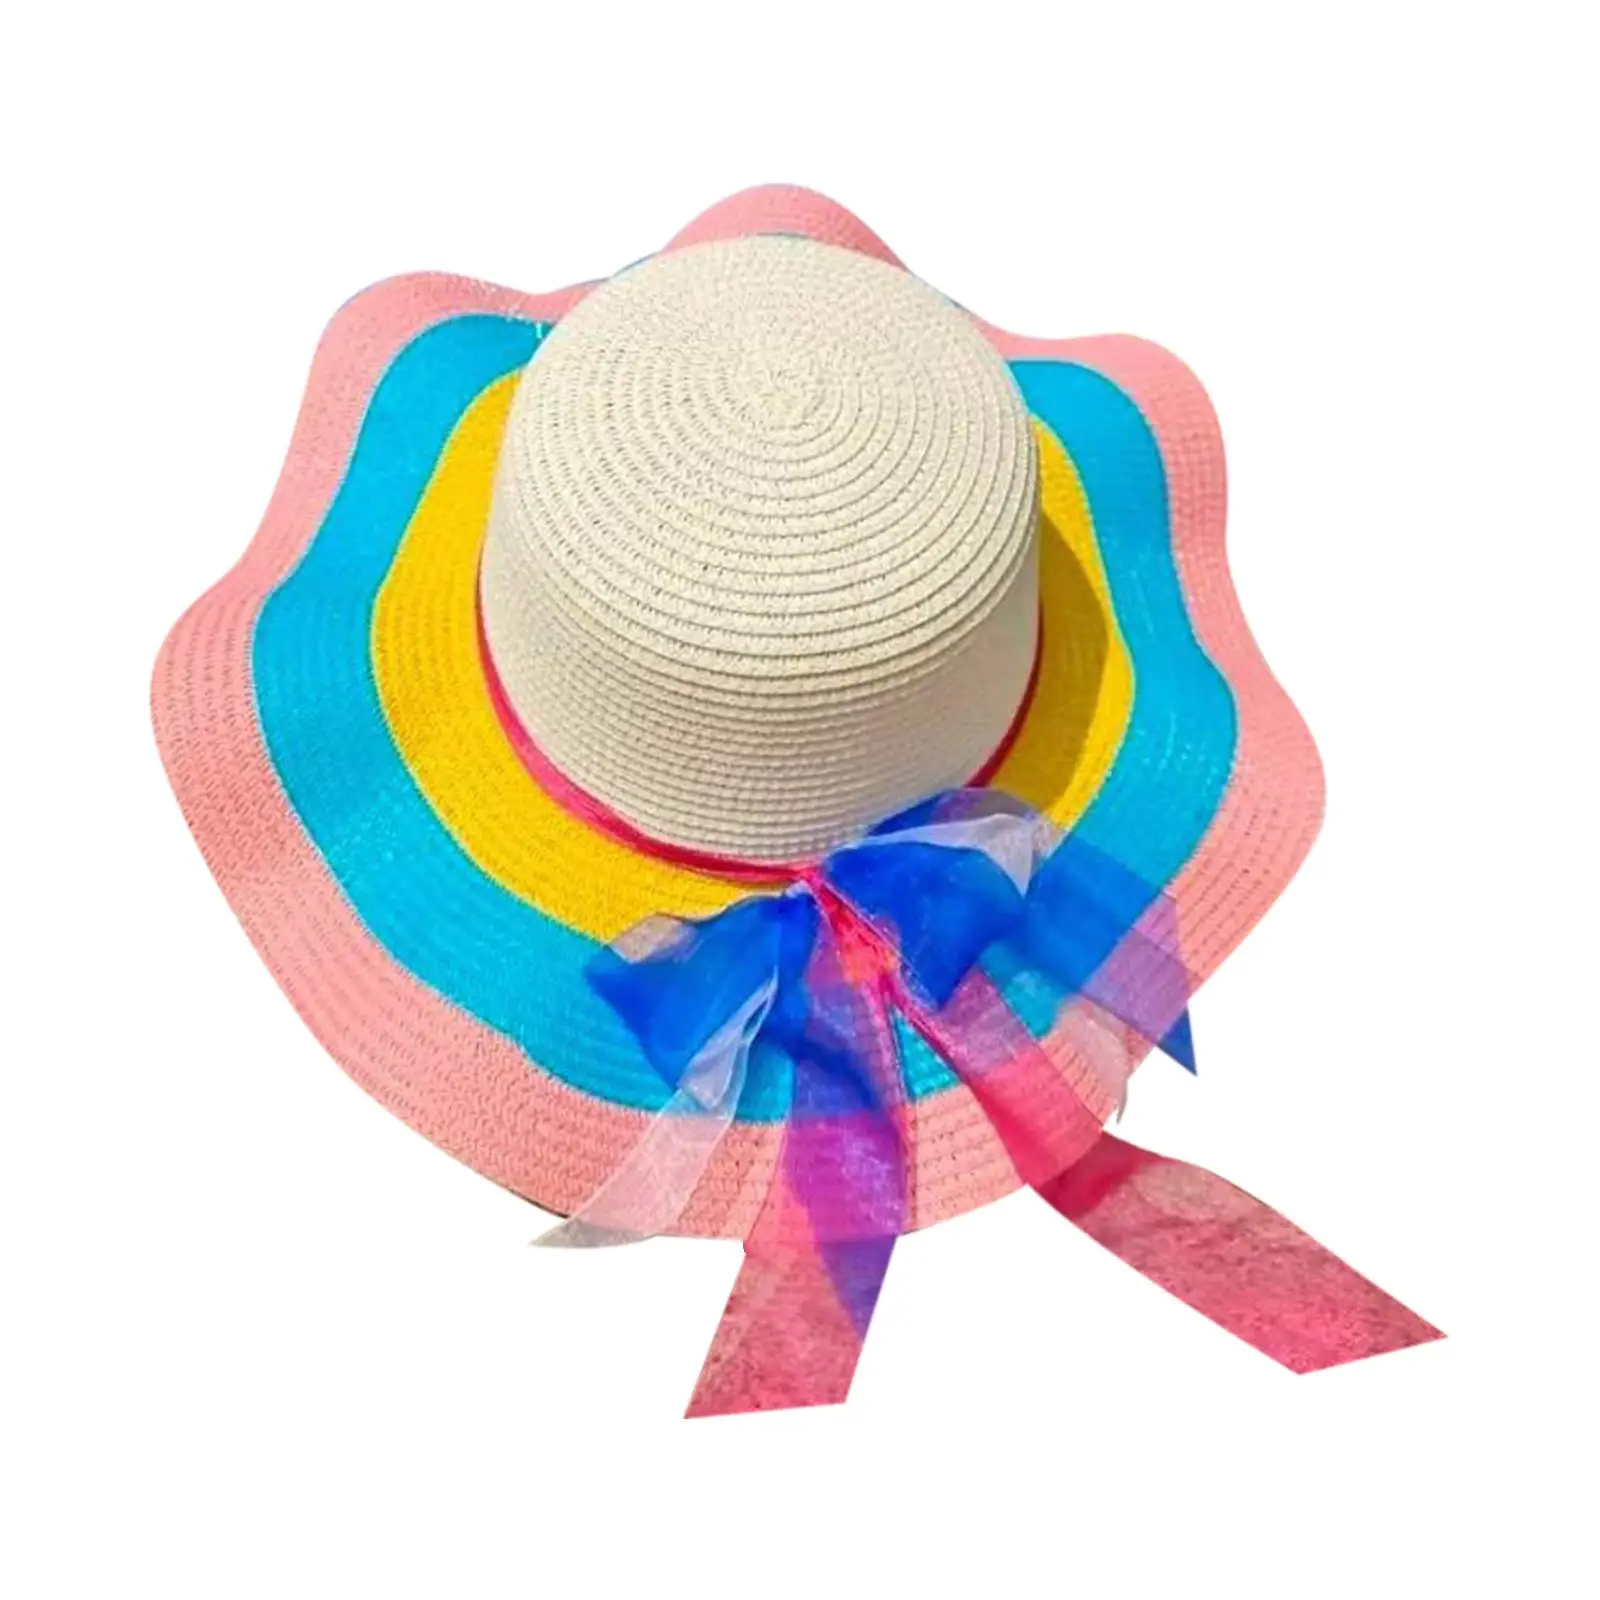 Women Wide Brim Straw Hat Romantic with Bow Knot Sun Protection Hat Beach Hats for Commuting Hiking Short Trips Outdoor Camping